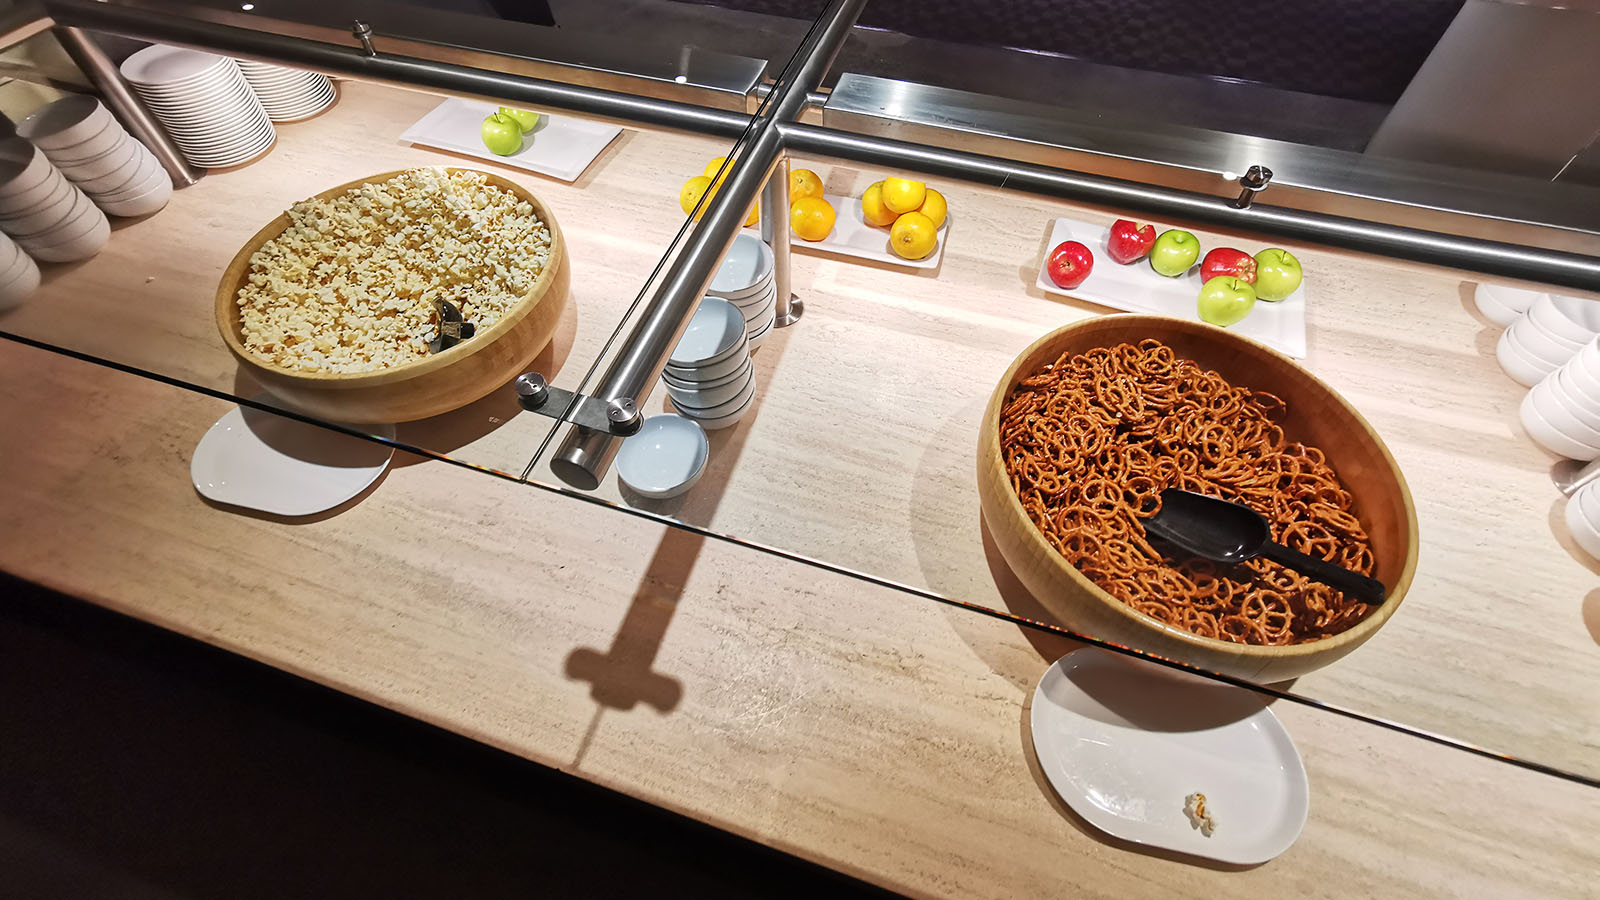 Popcorn and pretzels in the Qantas International Business Lounge in Los Angeles